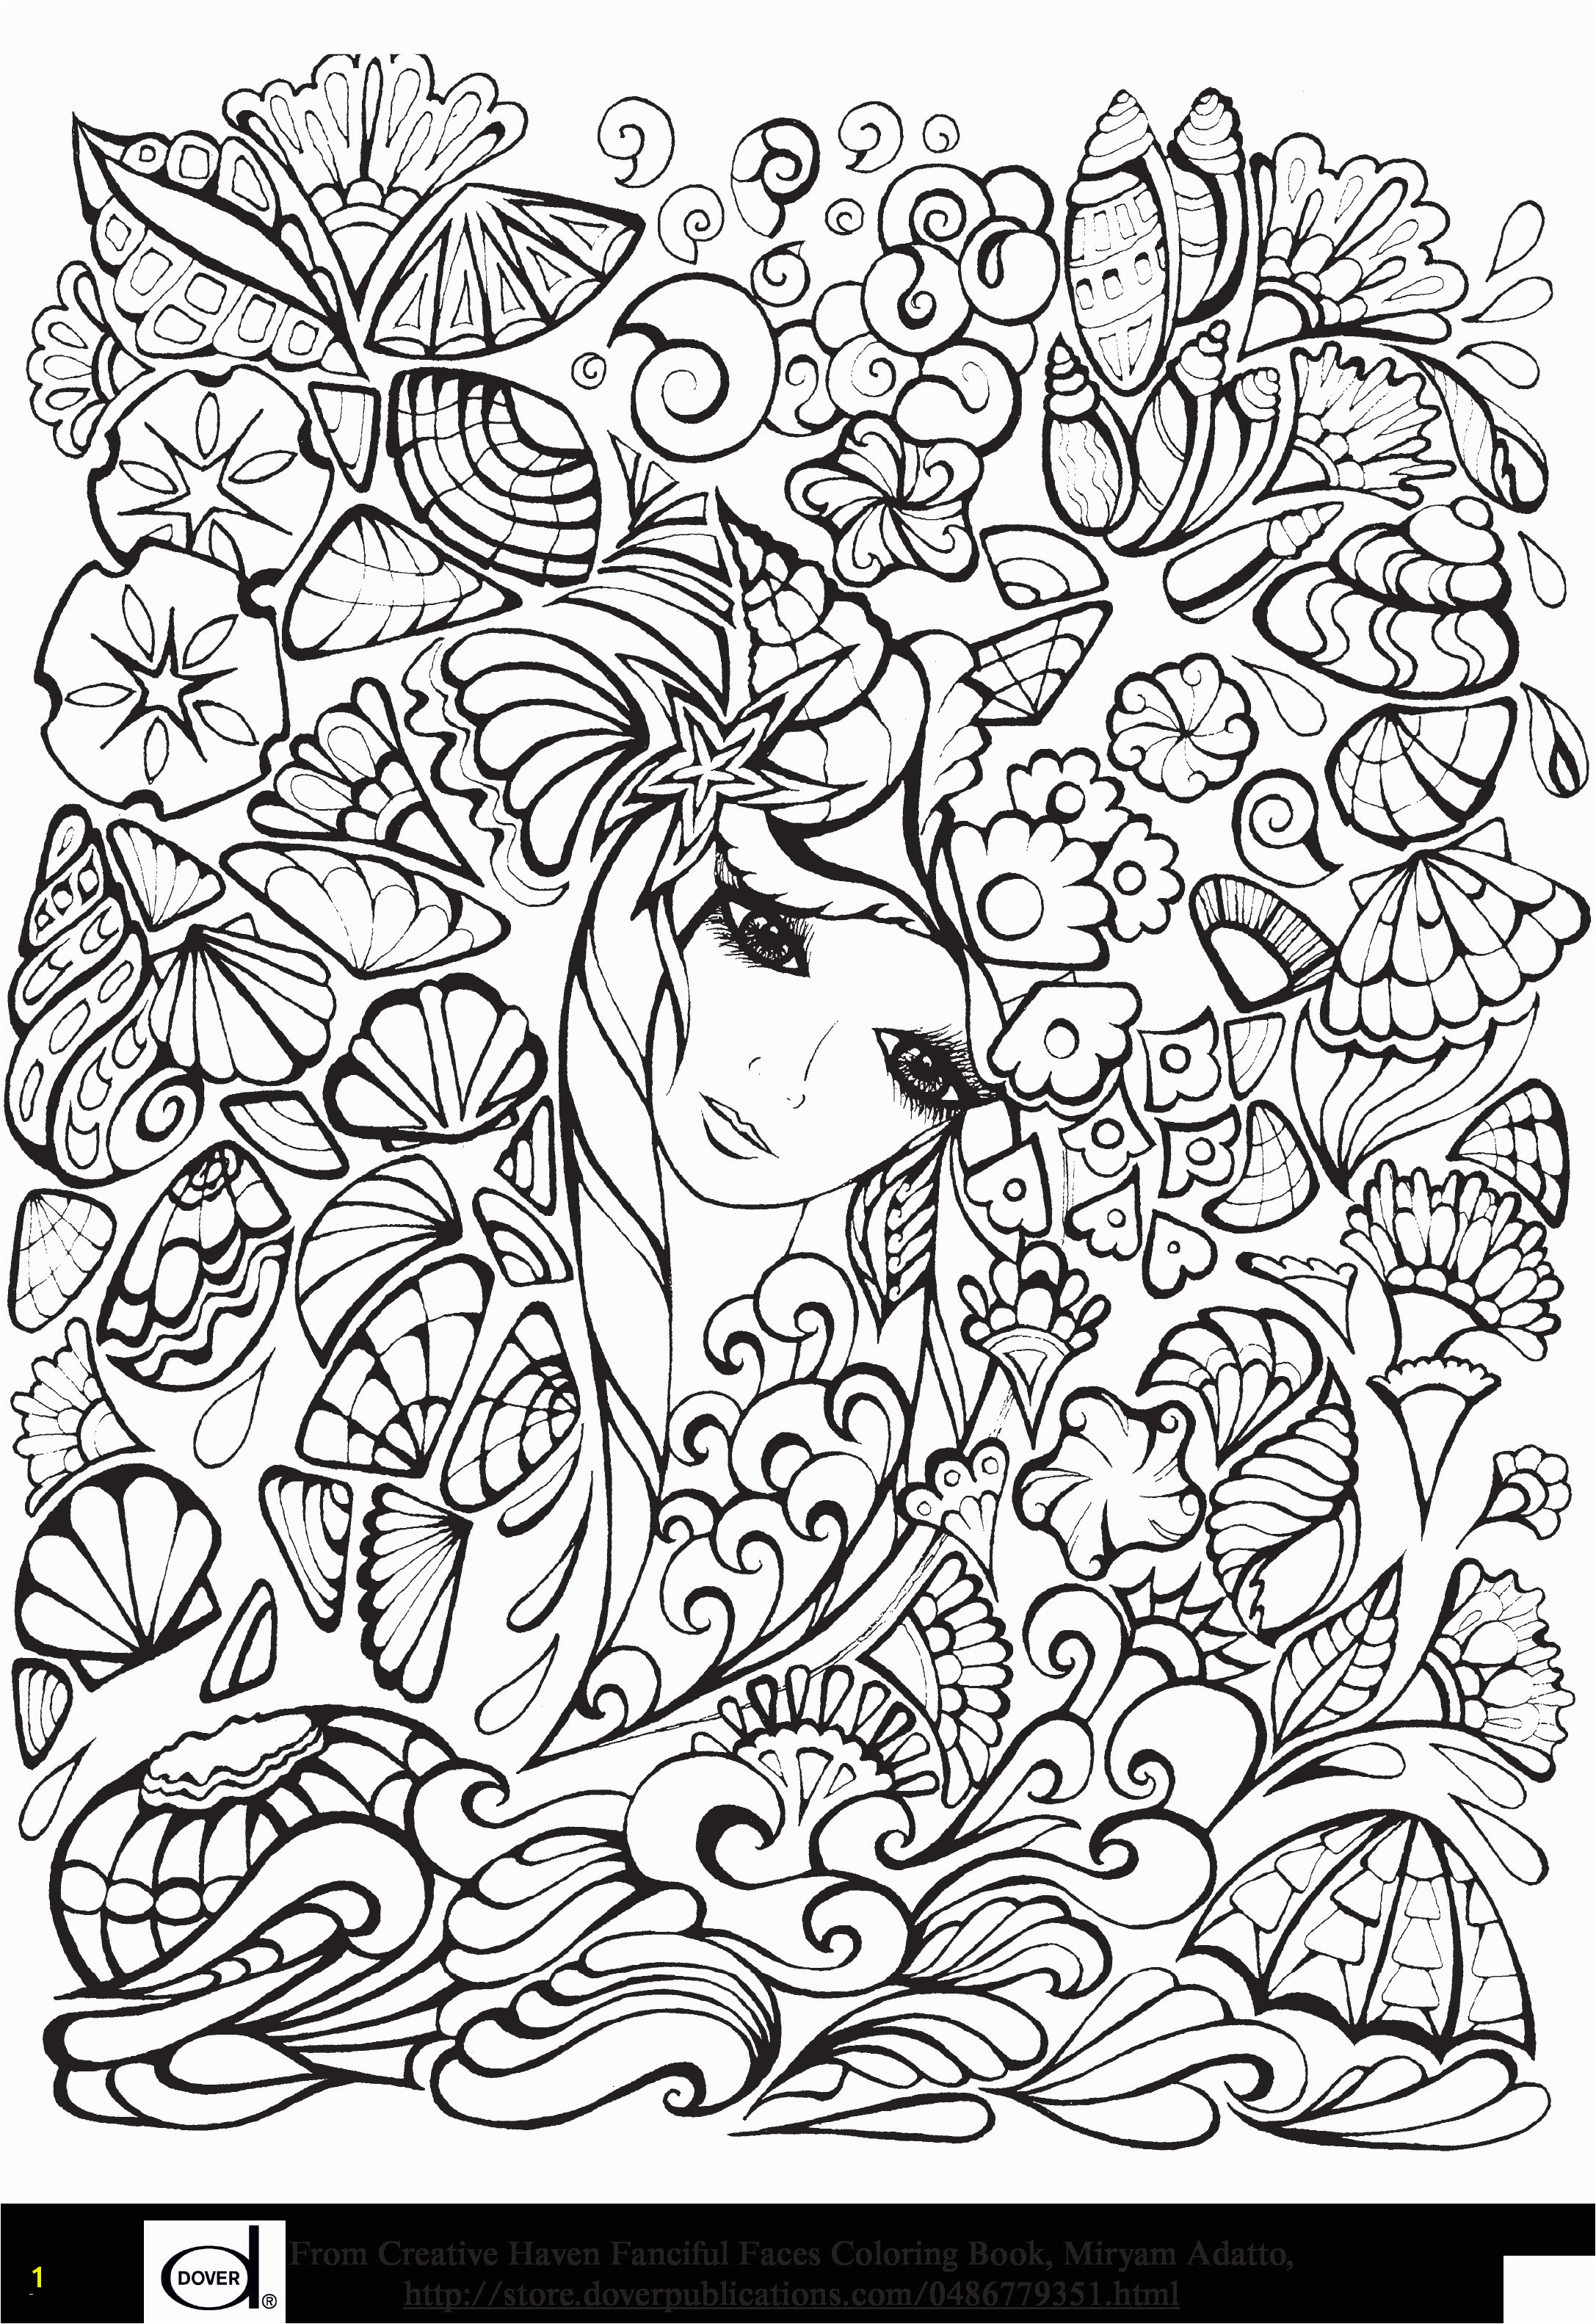 Life Of Pi Coloring Pages Olaf Coloring Pages Download thephotosync